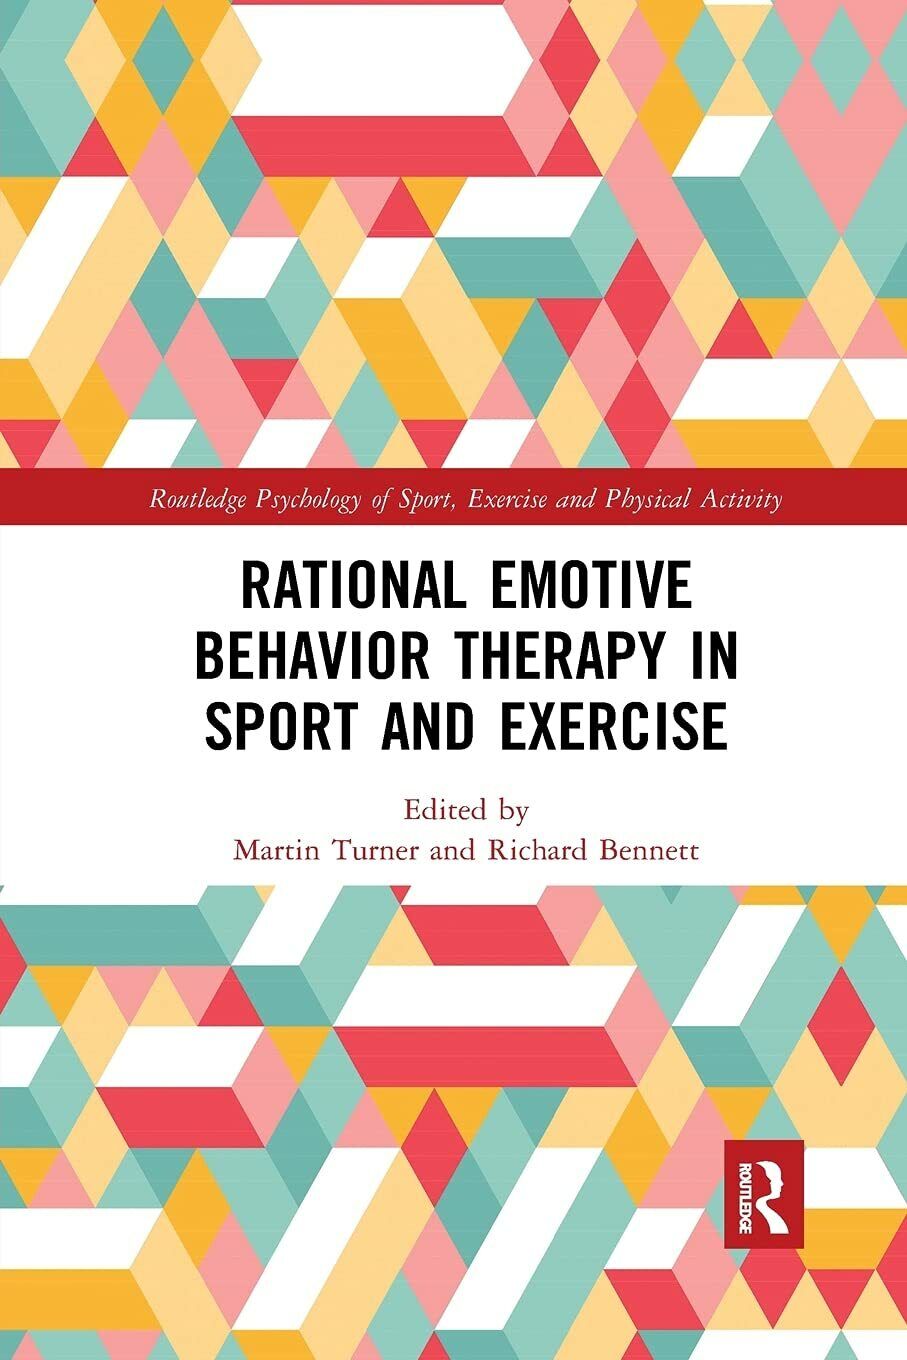 Rational Emotive Behavior Therapy in Sport and Exercise - Martin Turner - 2020 libro usato